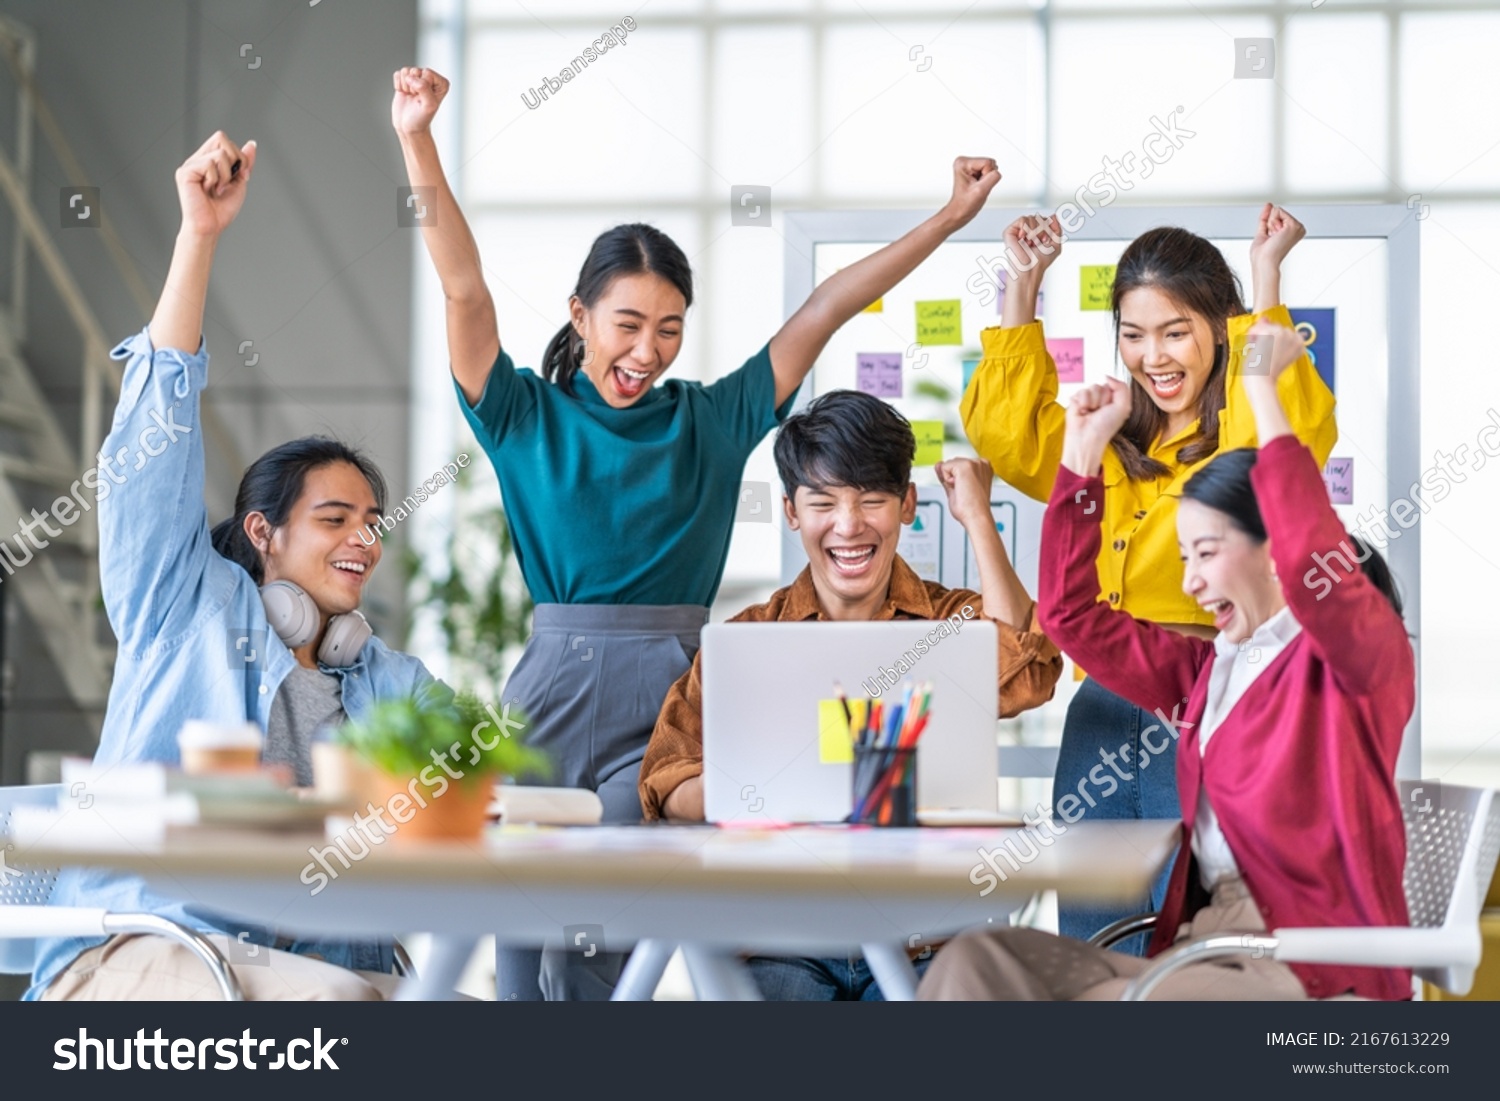 Young happy Asian business man, woman work together, celebrate success in start up office. Creative team brainstorm meeting, businesspeople colleague partnership or office coworker teamwork concept #2167613229